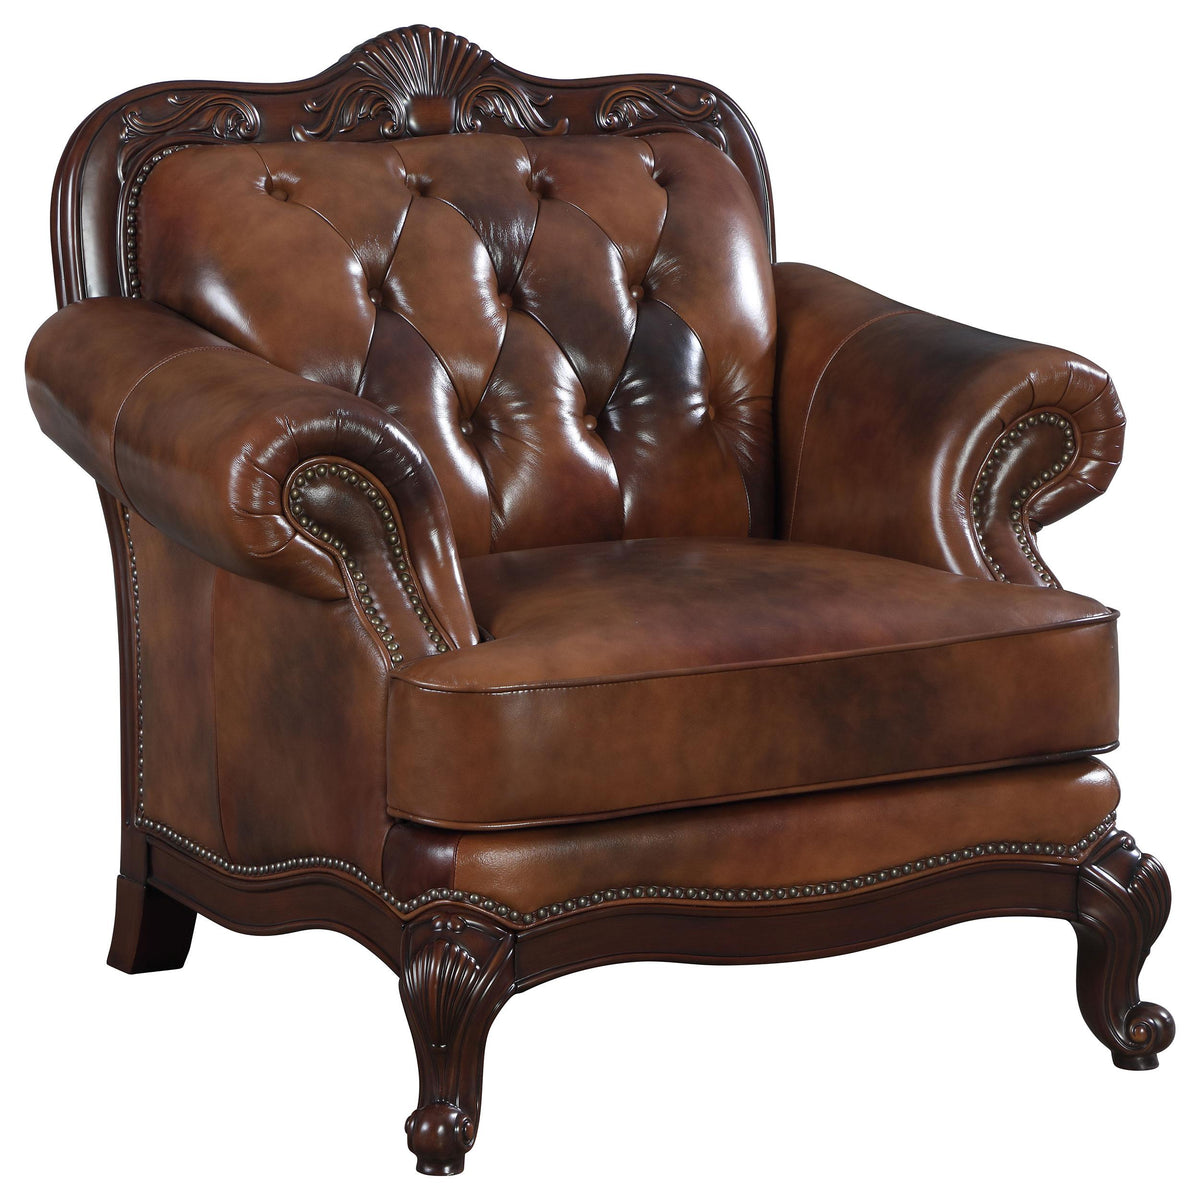 Victoria Rolled Arm Chair Tri-tone and Brown Victoria Rolled Arm Chair Tri-tone and Brown Half Price Furniture